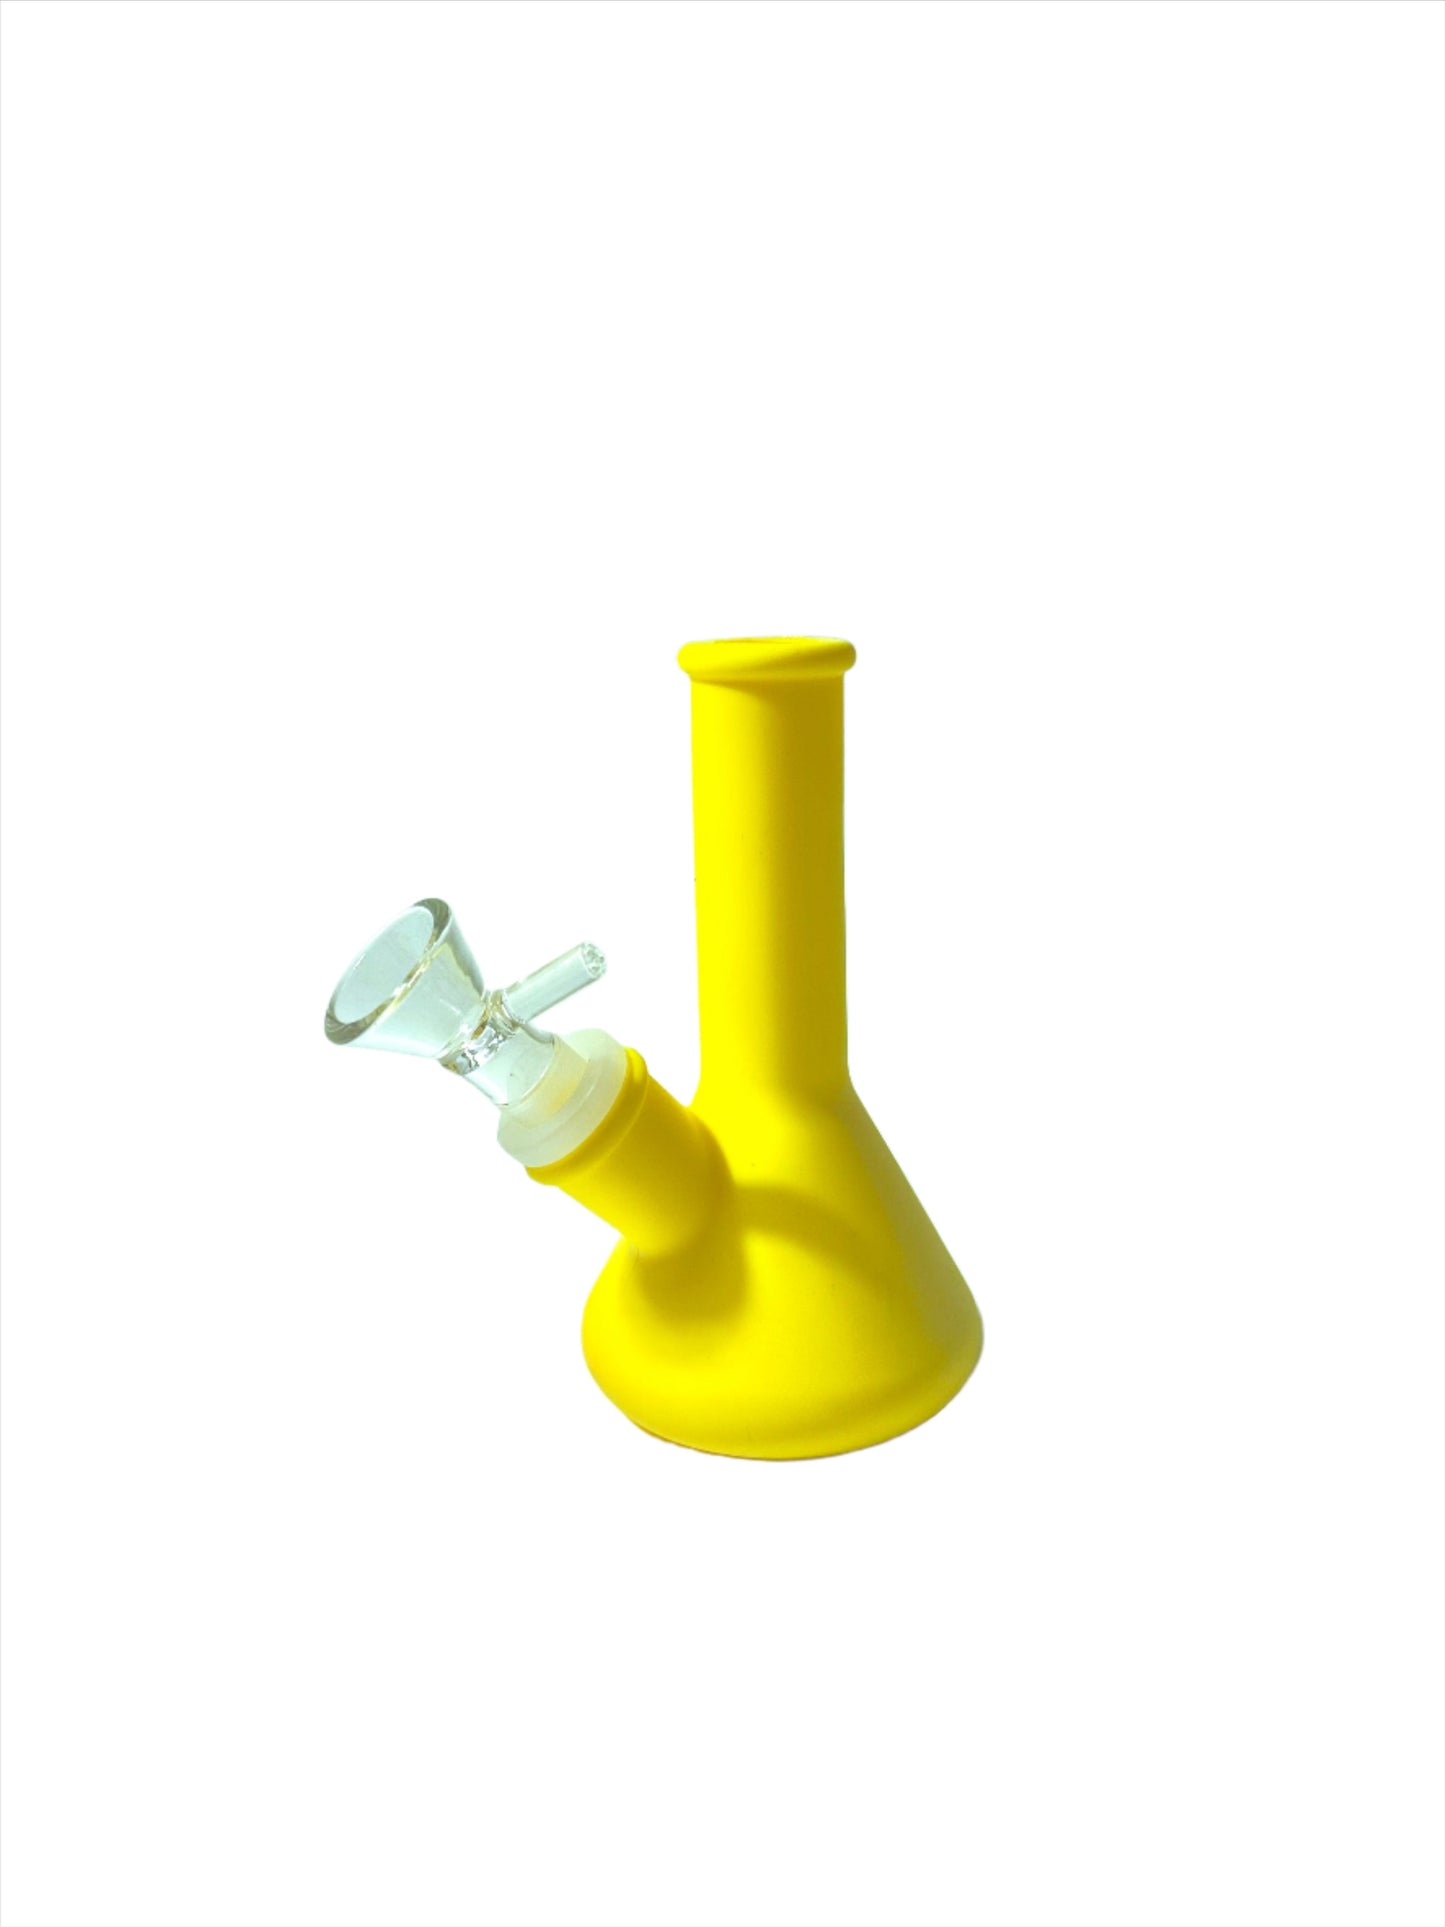 5 Inch Silicone St\Water Bong w 14mm Glass Male Bowl